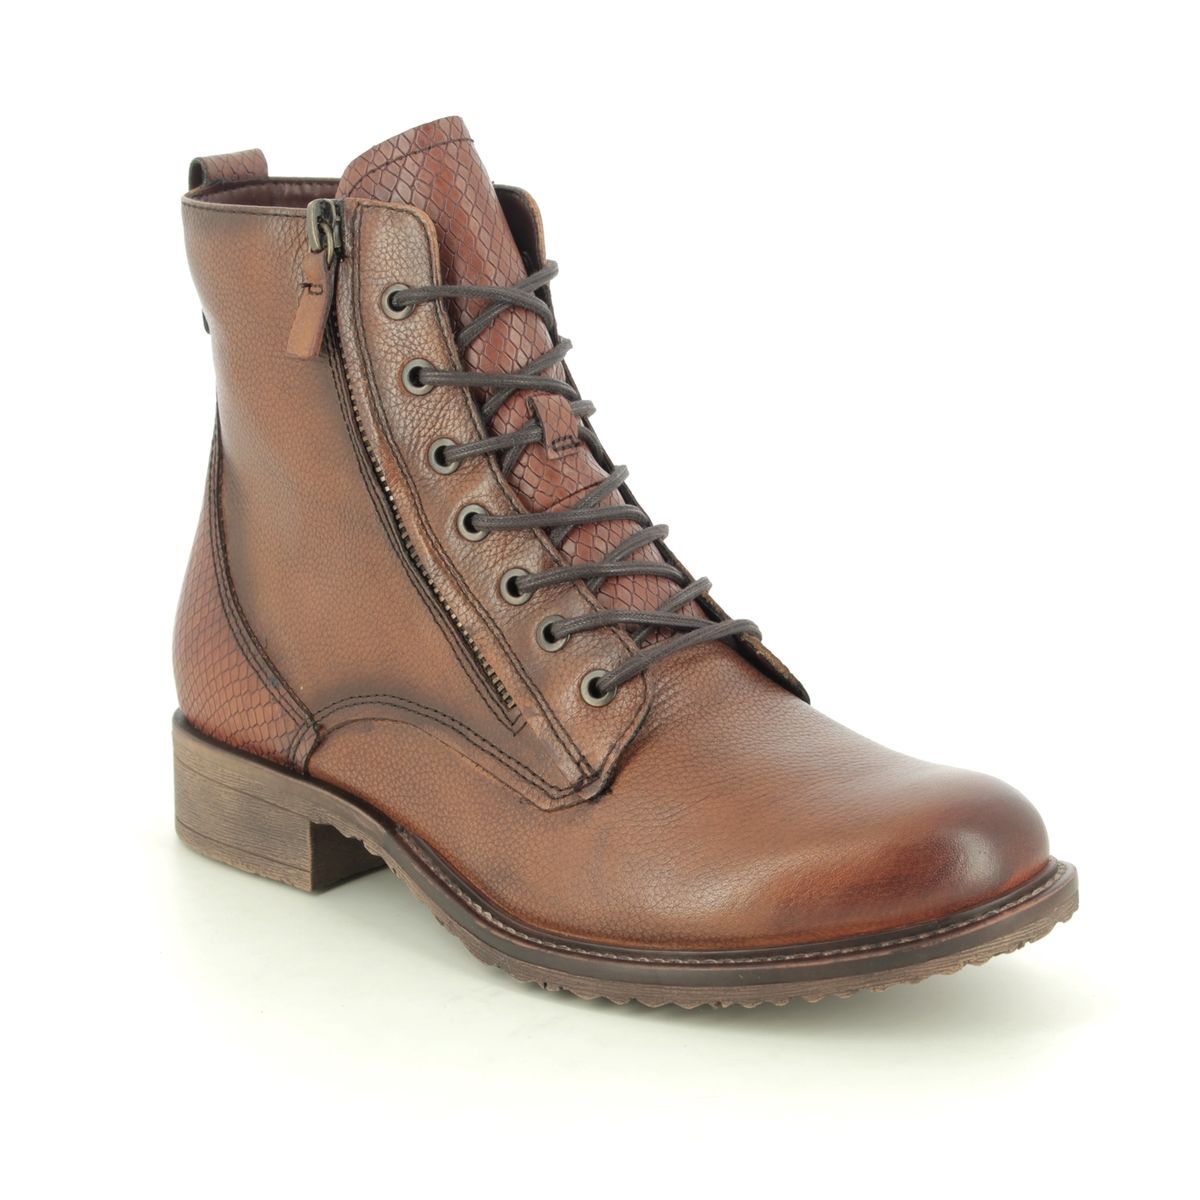 Tamaris Anouk Tan Leather Womens Lace Up Boots 25211-29-393 in a Plain Leather in Size 40